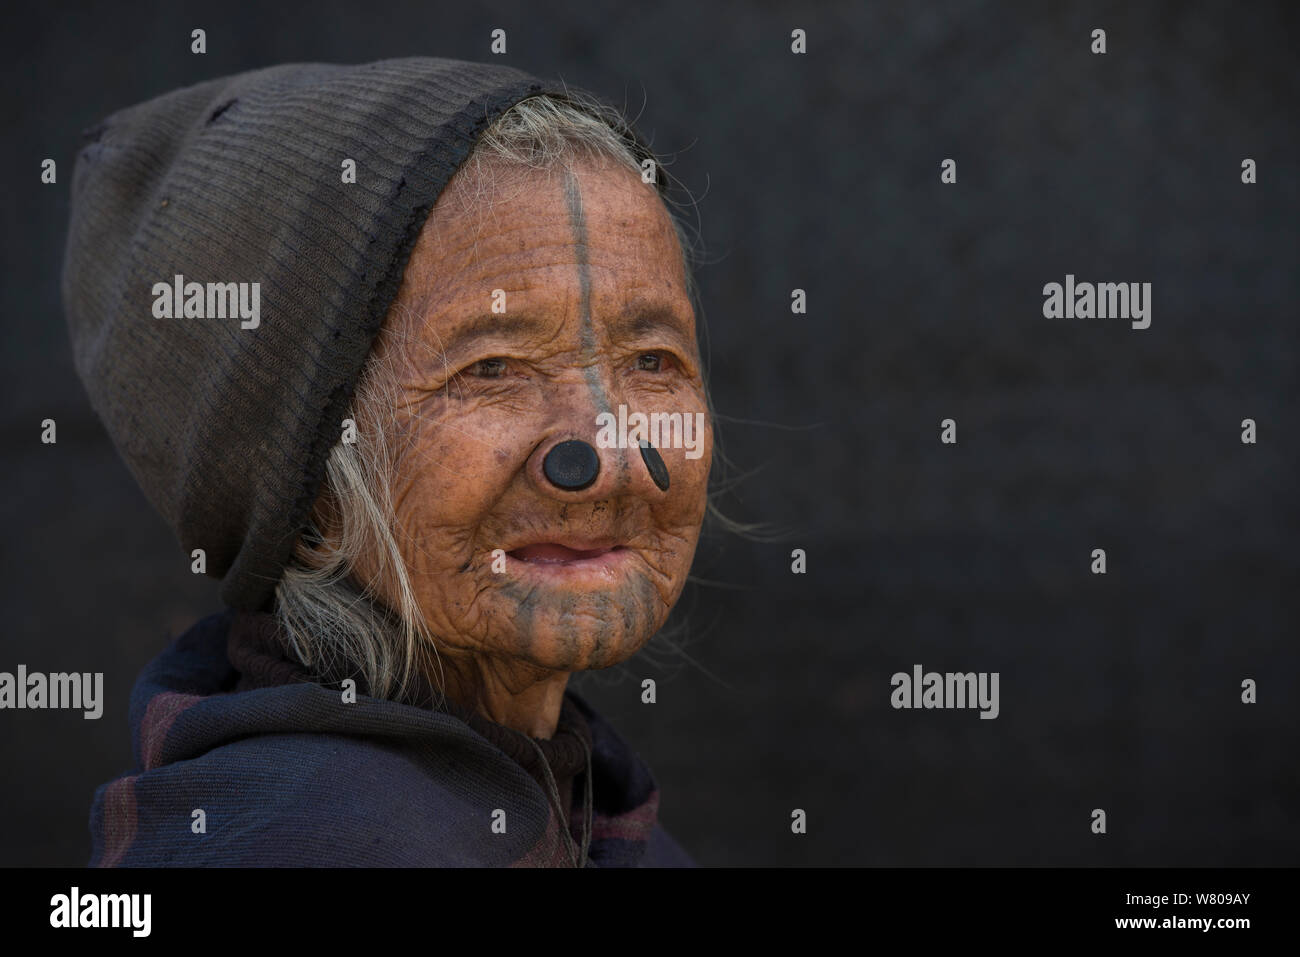 Apatani woman with facial tattoos and traditional nose plugs / Yapin Hulo made  to make them look unattractive to males from other tribes. These facial modifications are now outlawed. Apatani Tribe, Ziro Valley, Himalayan Foothills, Arunachal Pradesh.North East India, November 2014. Stock Photo